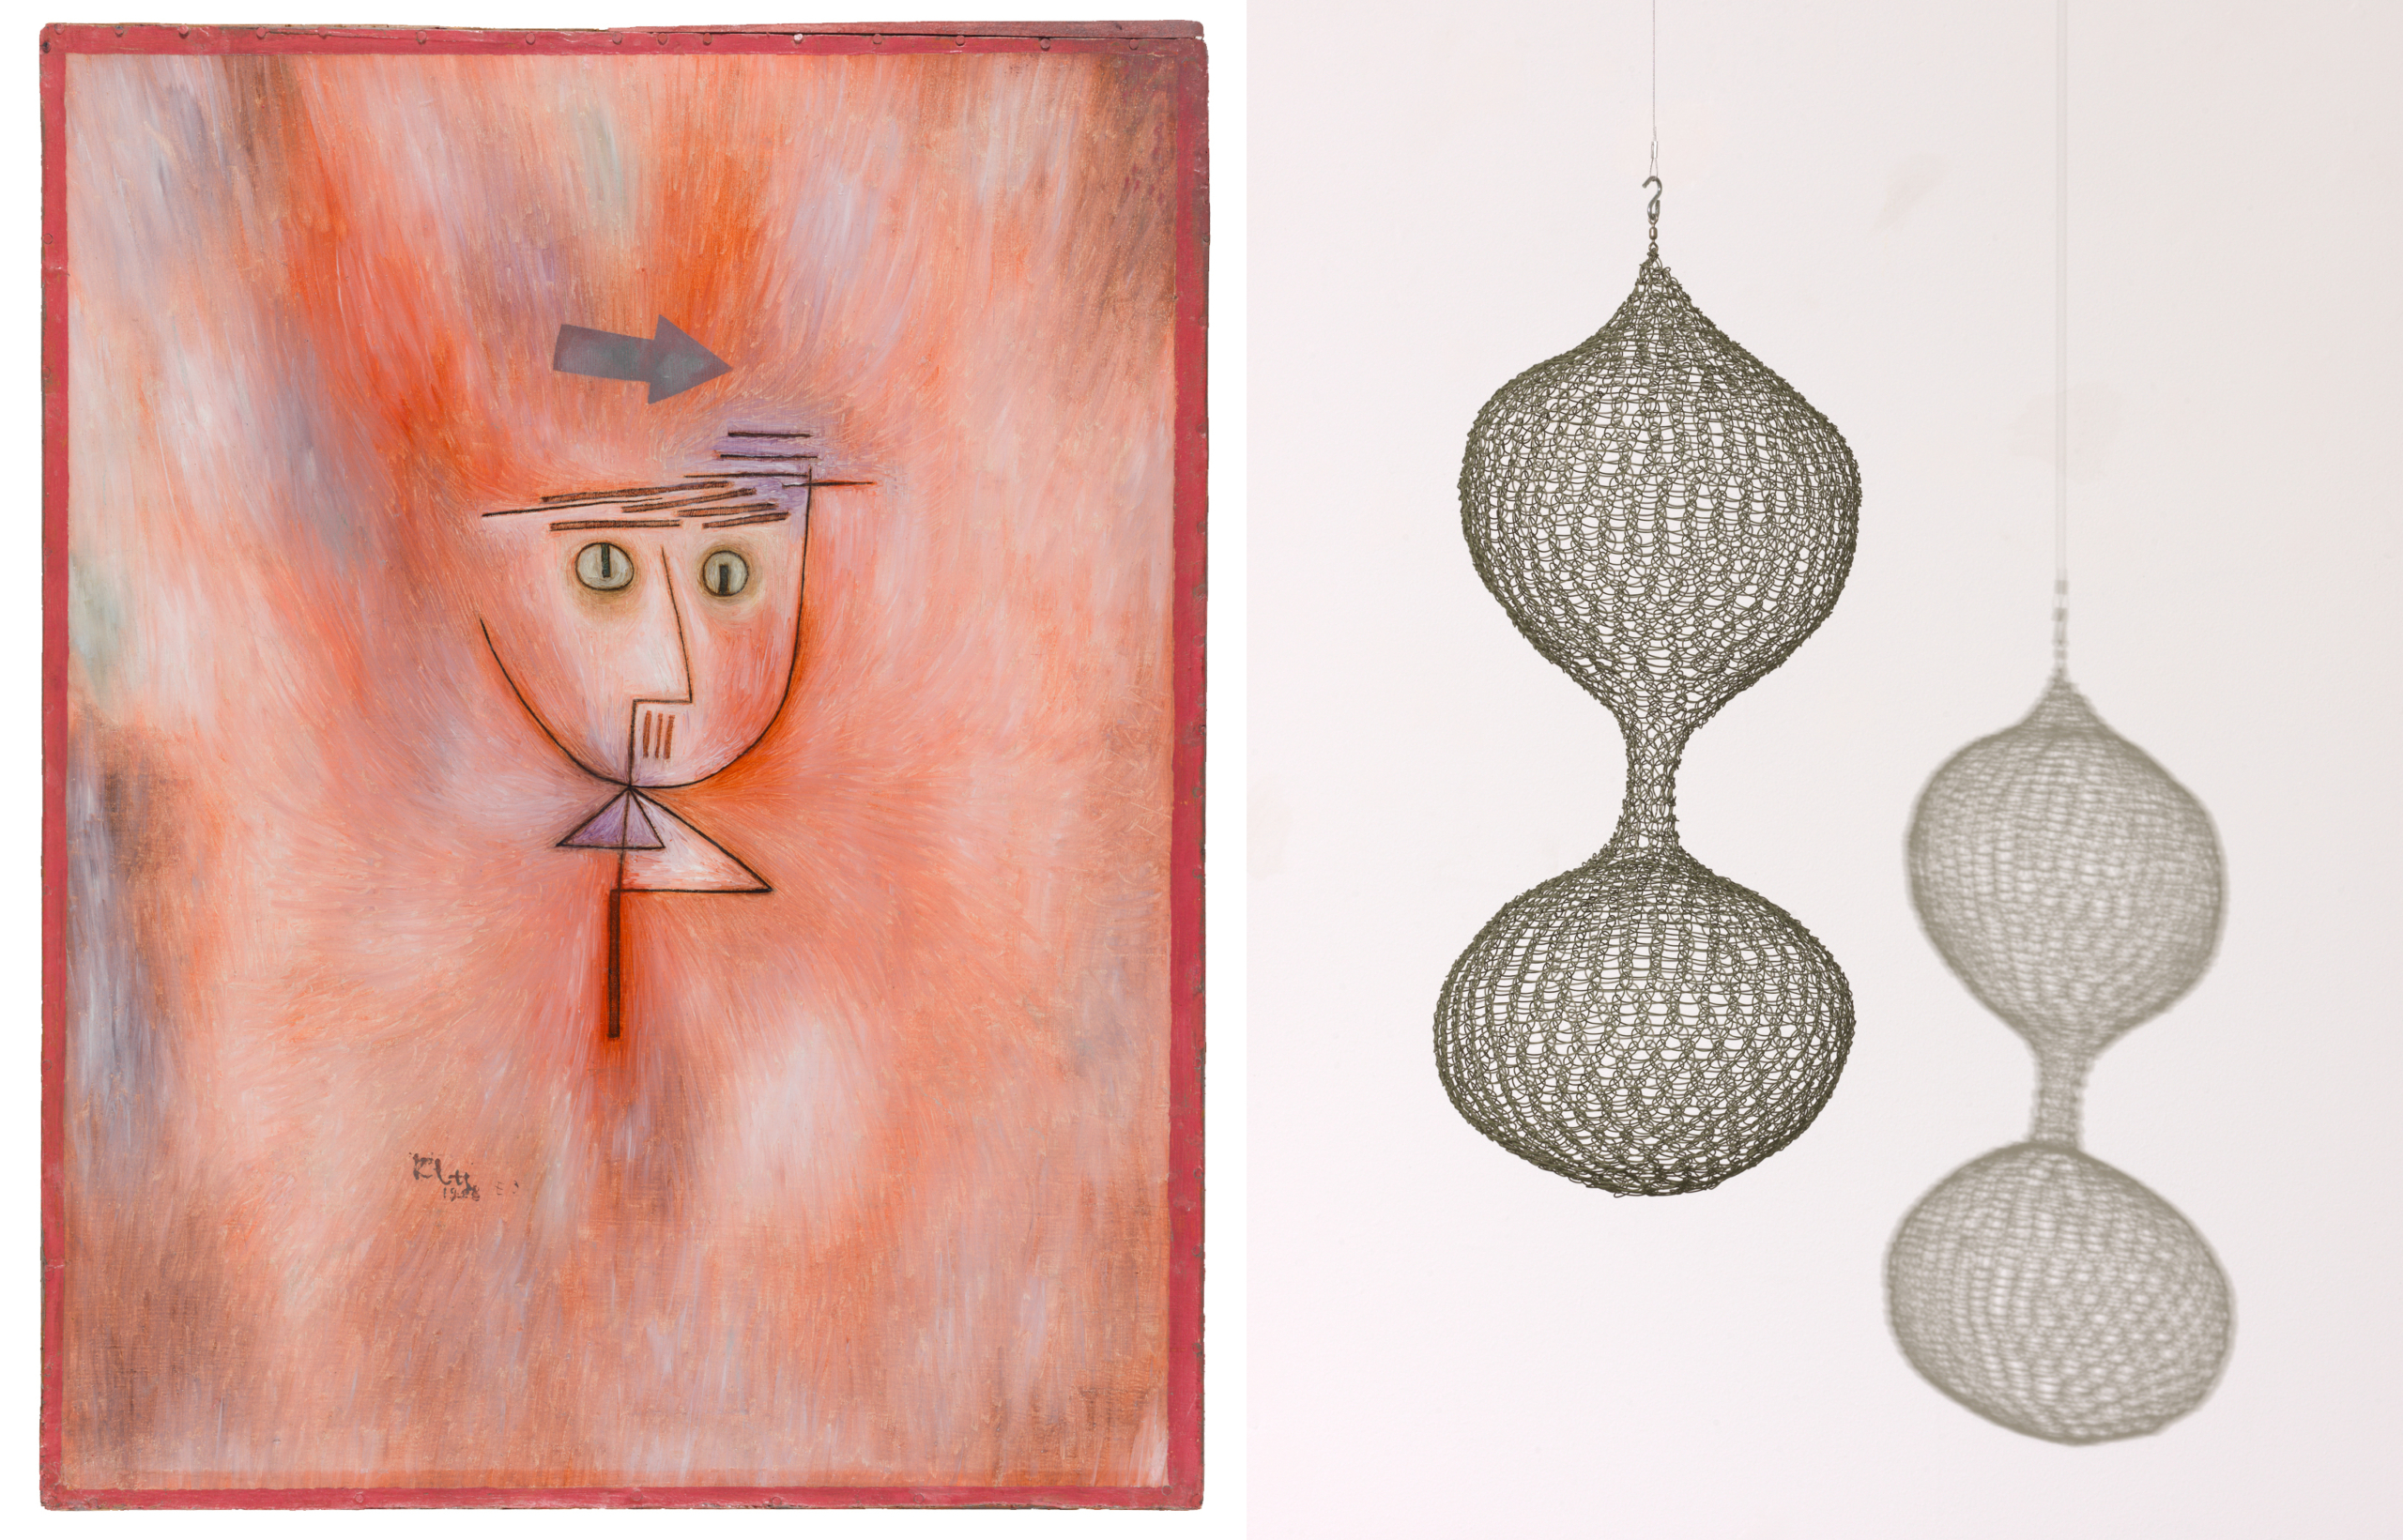 Left, Paul Klee, ‘Fast getroffen (Nearly Hit),’ 1928; Collection SFMOMA, Albert M. Bender Collection, Albert M. Bender Bequest Fund purchase; photo: Mary Ellen Hawkins. Right, Ruth Asawa, ‘Untitled (S.530, Hanging, Two-Lobed, Continuous Form),’ ca. 1952-1954; Collection SFMOMA, Gift of Robert B. Howard; © 2021 Estate of Ruth Asawa / Artists Rights Society (ARS), New York; photo: Katherine Du Tiel